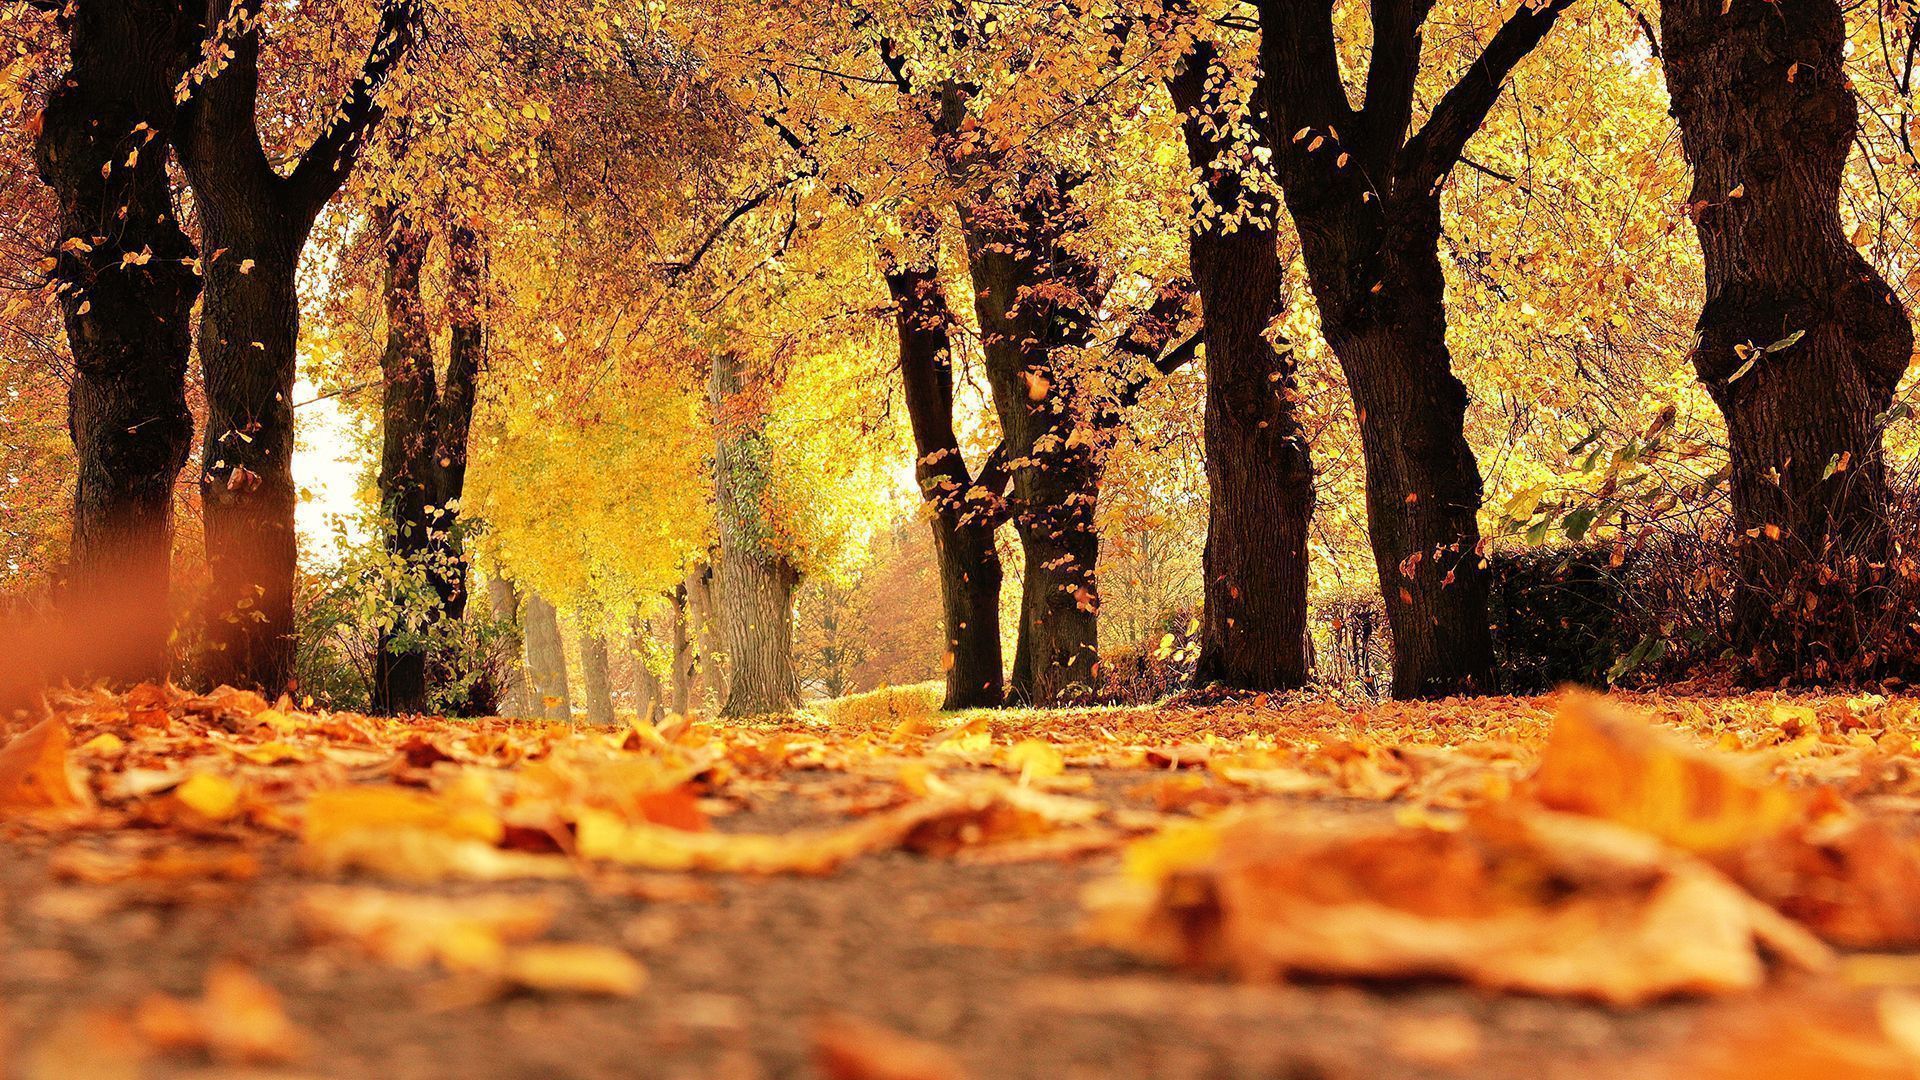 A forest road covered in fallen yellow leaves. - Chromebook